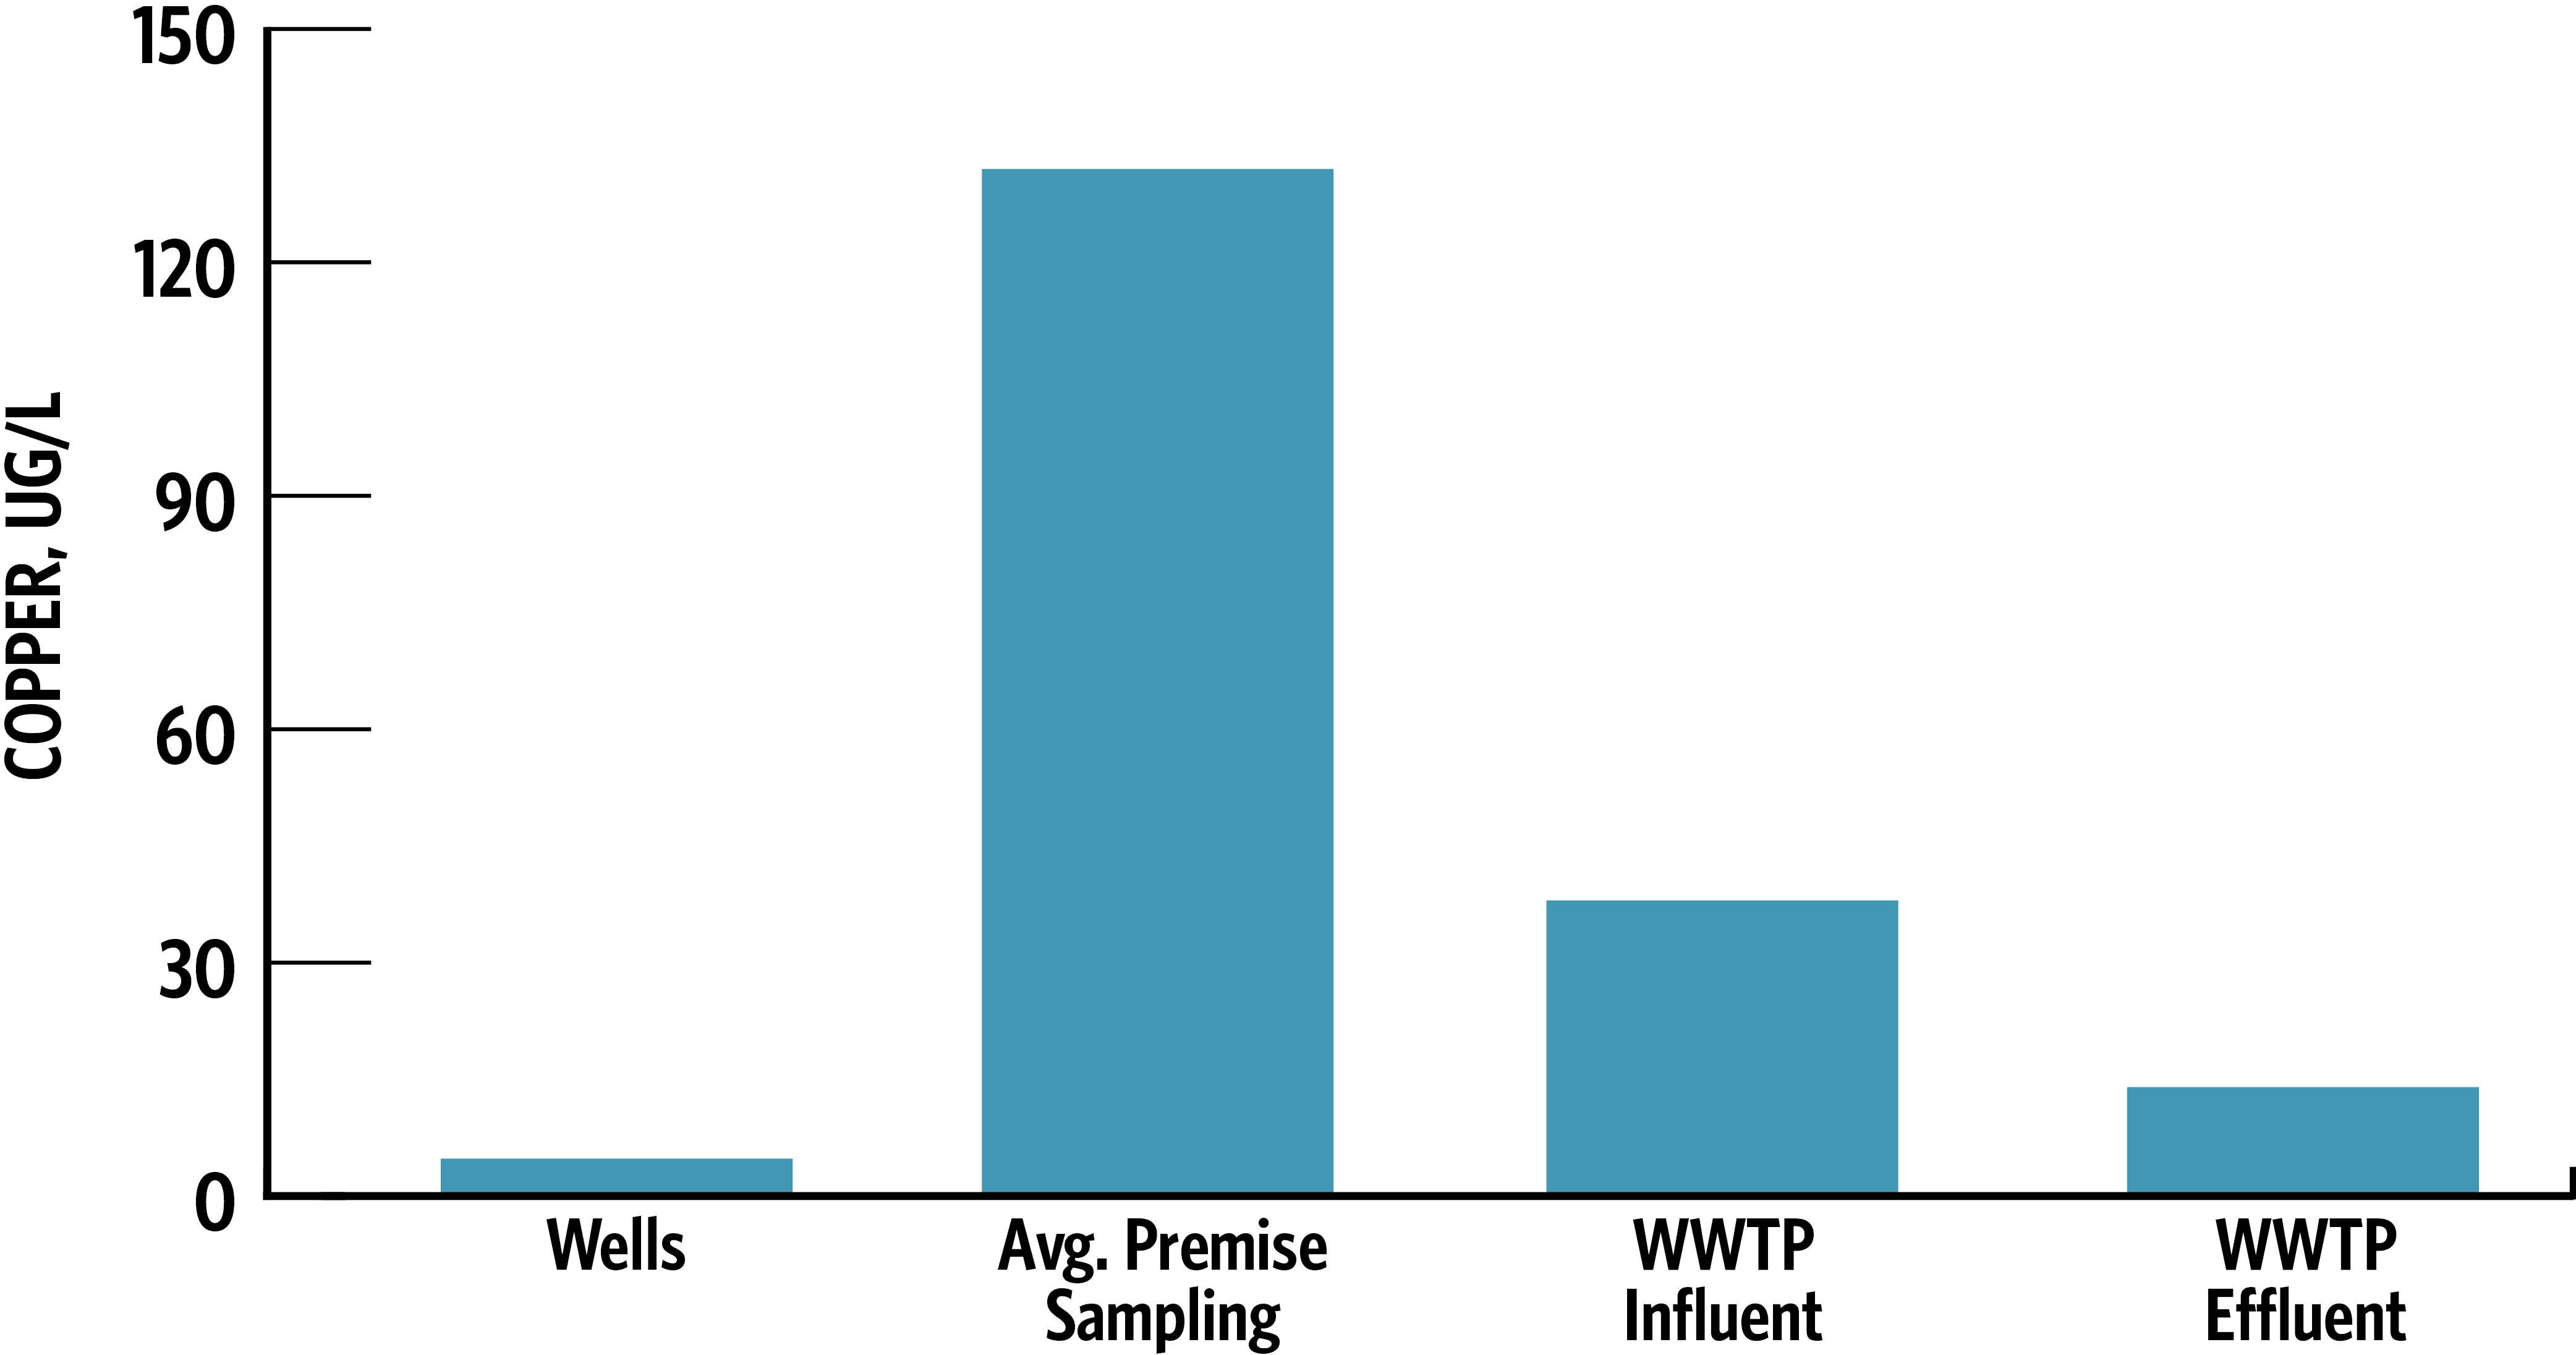 Figure 3 - Copper Concentrations at Select Points in City’s Water/Wastewater Systems